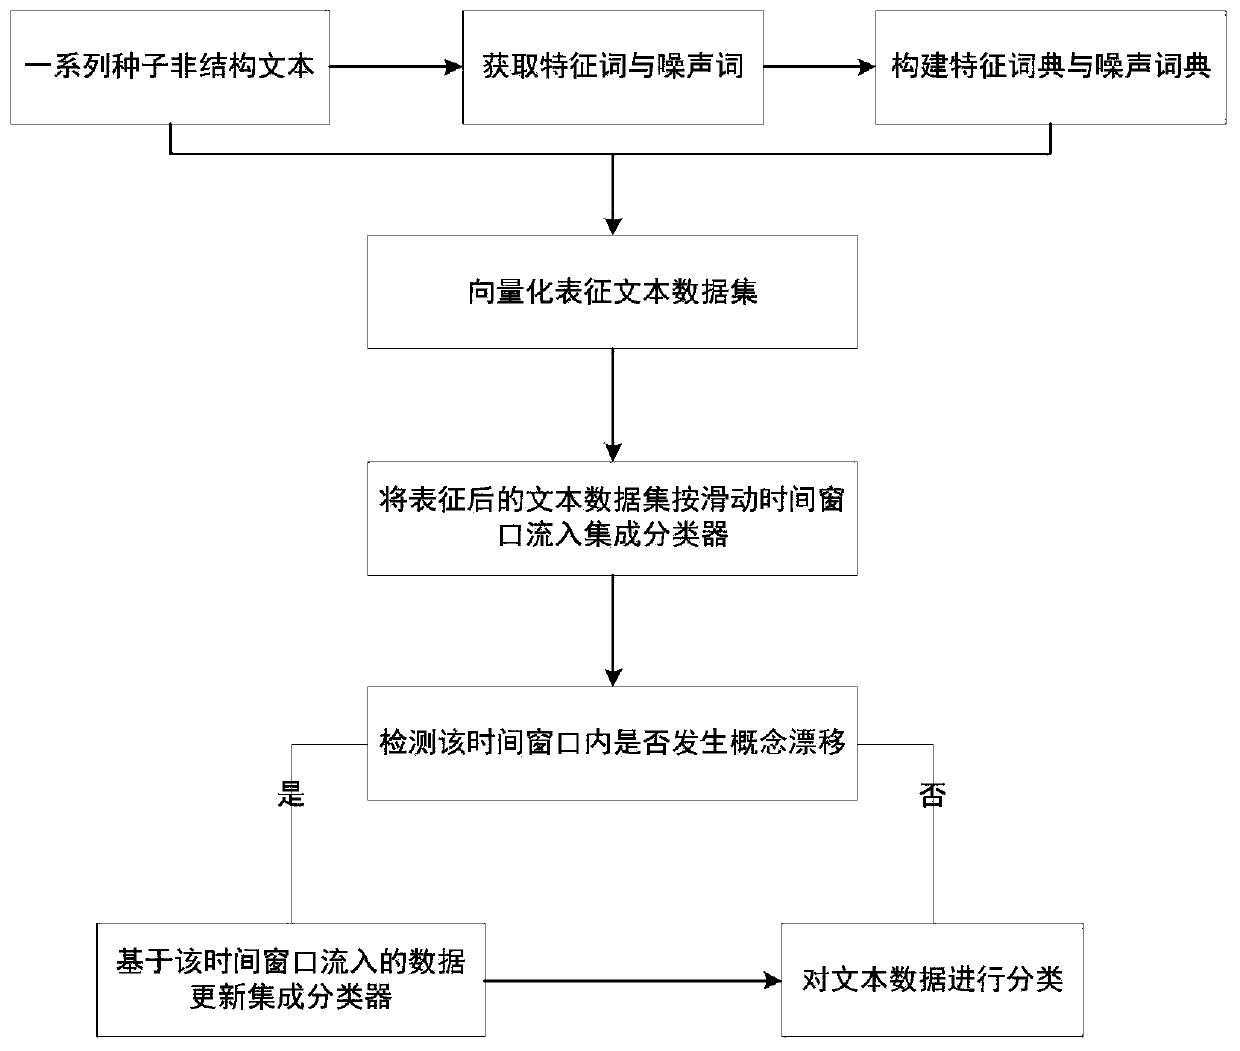 A text data stream classification method based on word vectors and an integrated SVM